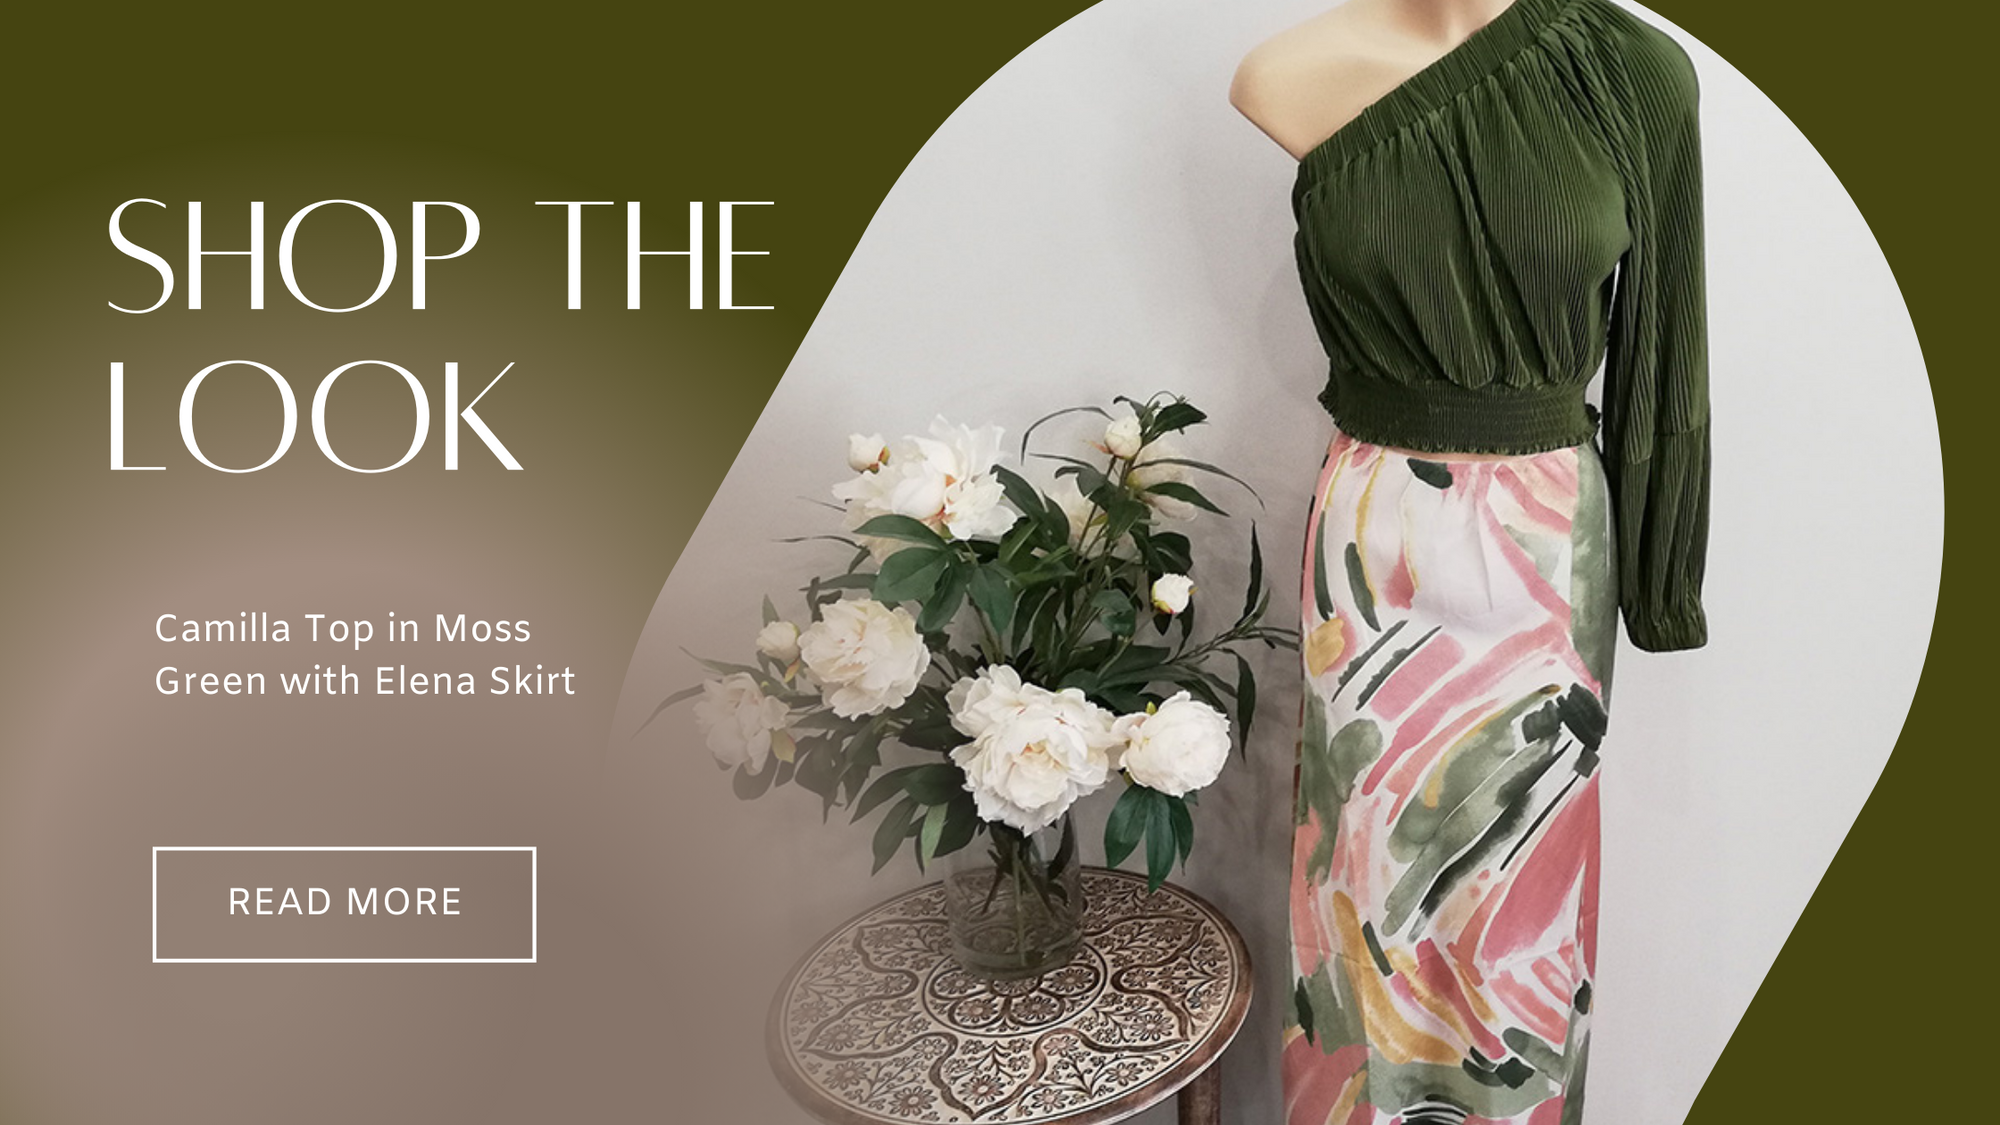 Shop the Look at Kindred Spirit Boutique and Gift